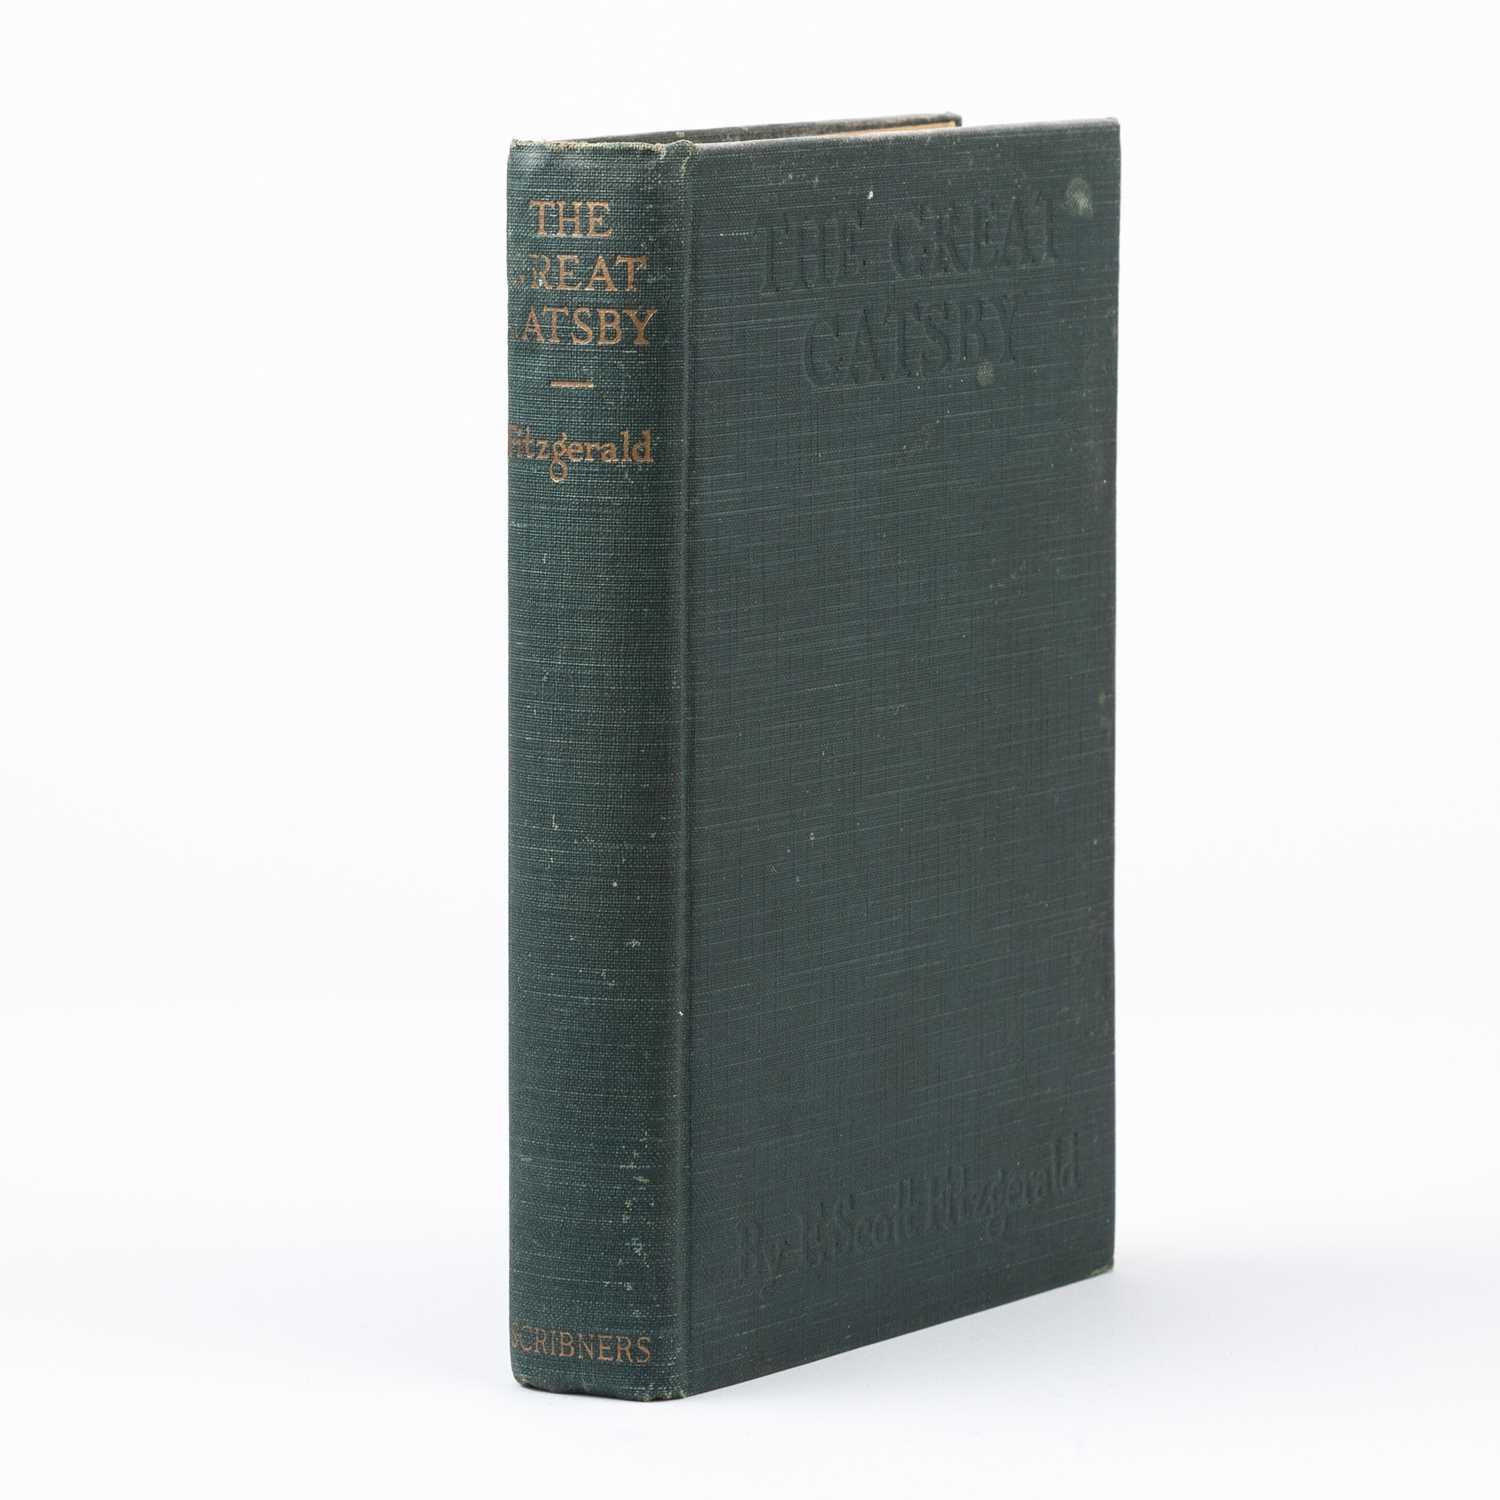 Lot 175 - The first edition of Fitzgerald's masterpiece